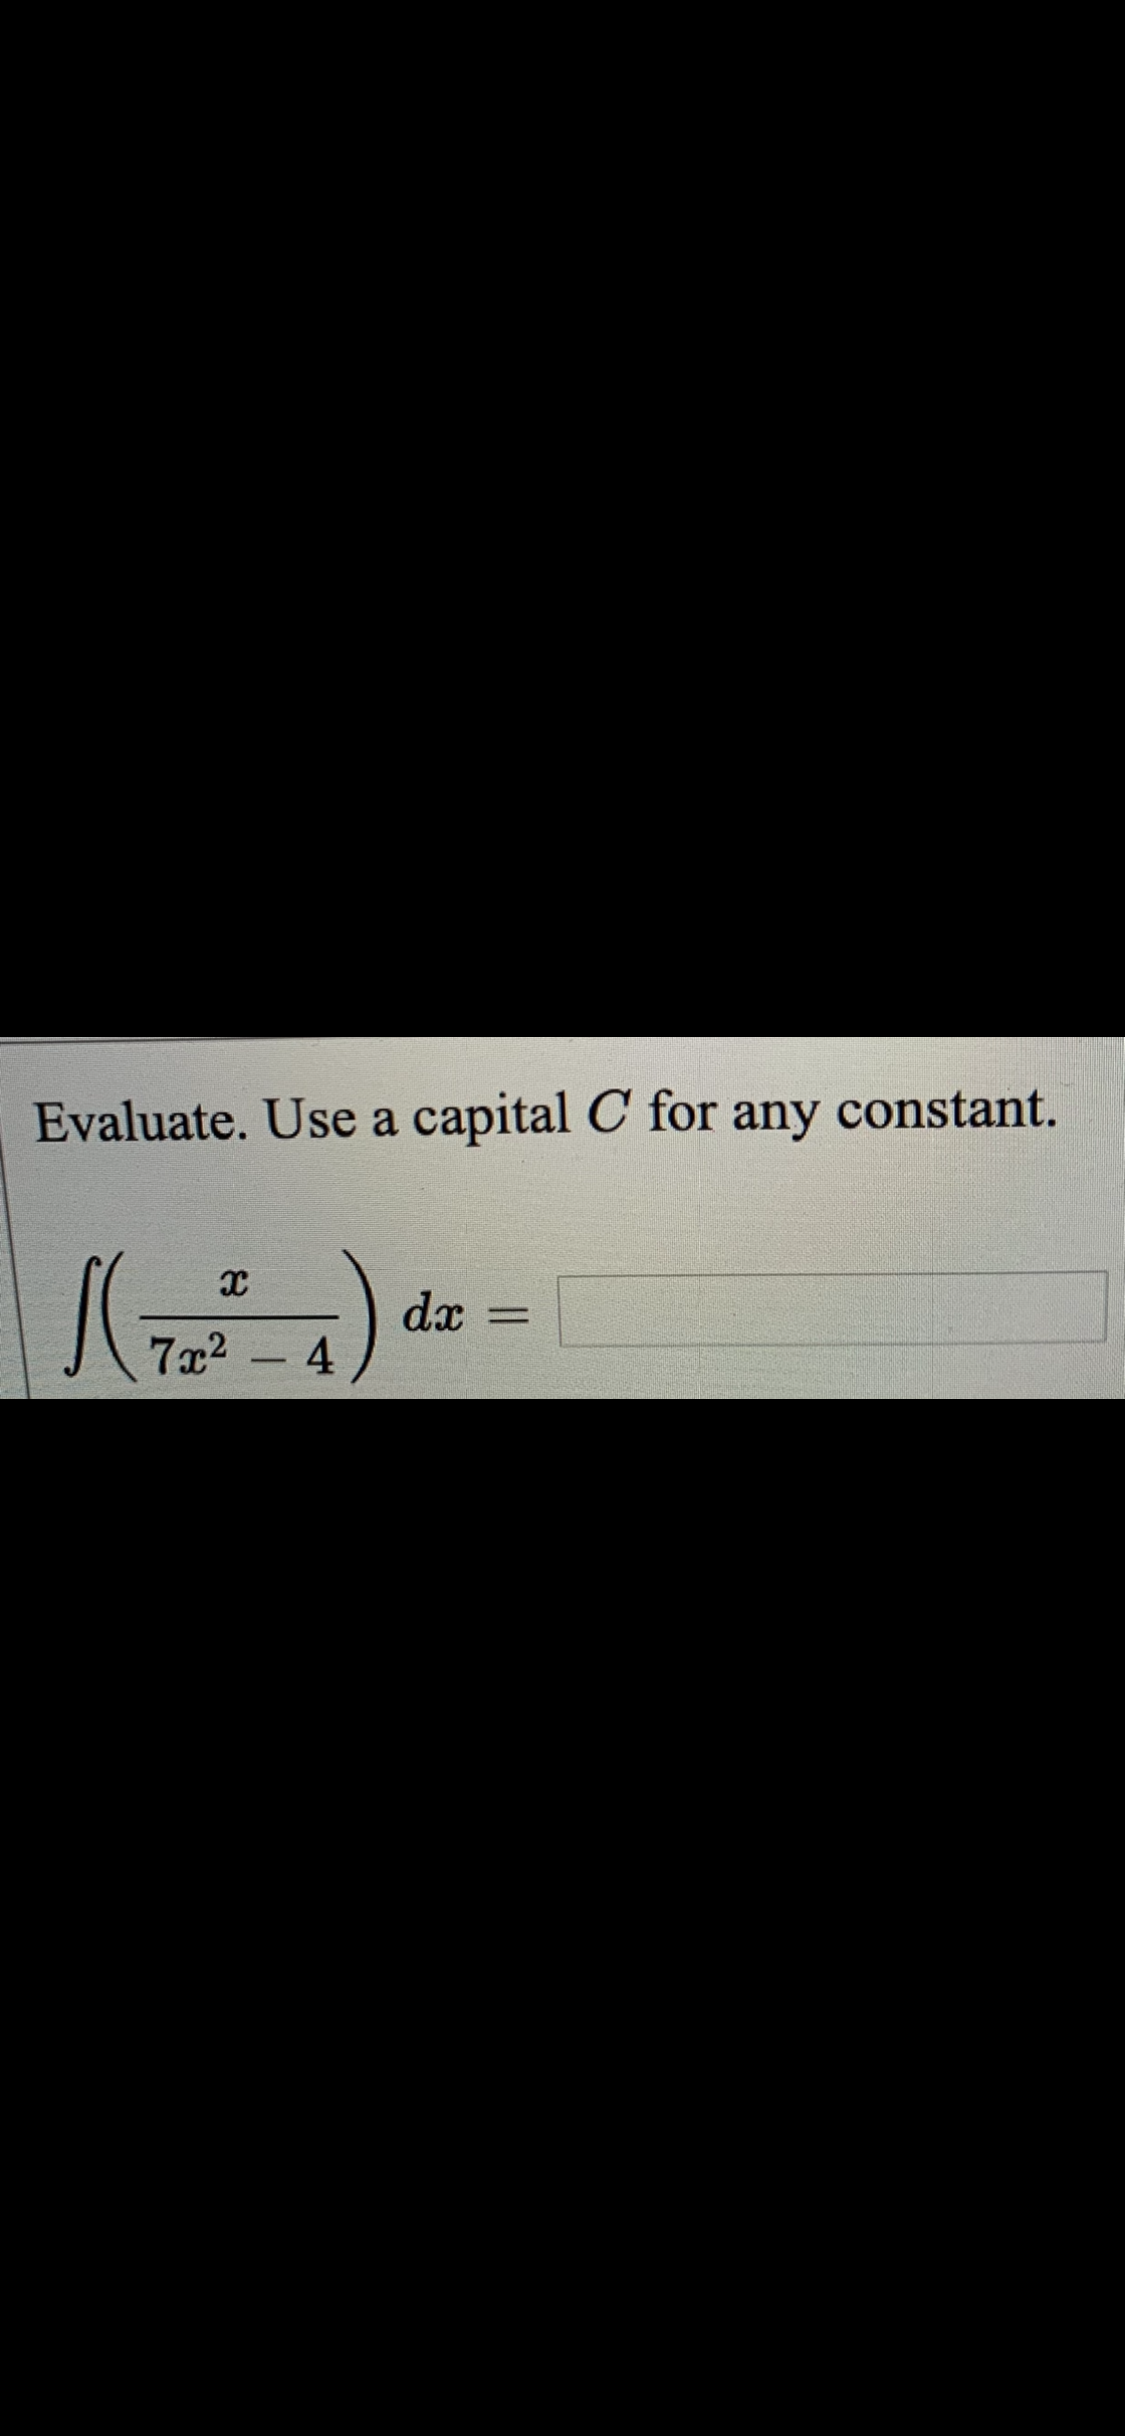 Evaluate. Use a capital C for
any
constant.
dx
4
7x2
-
